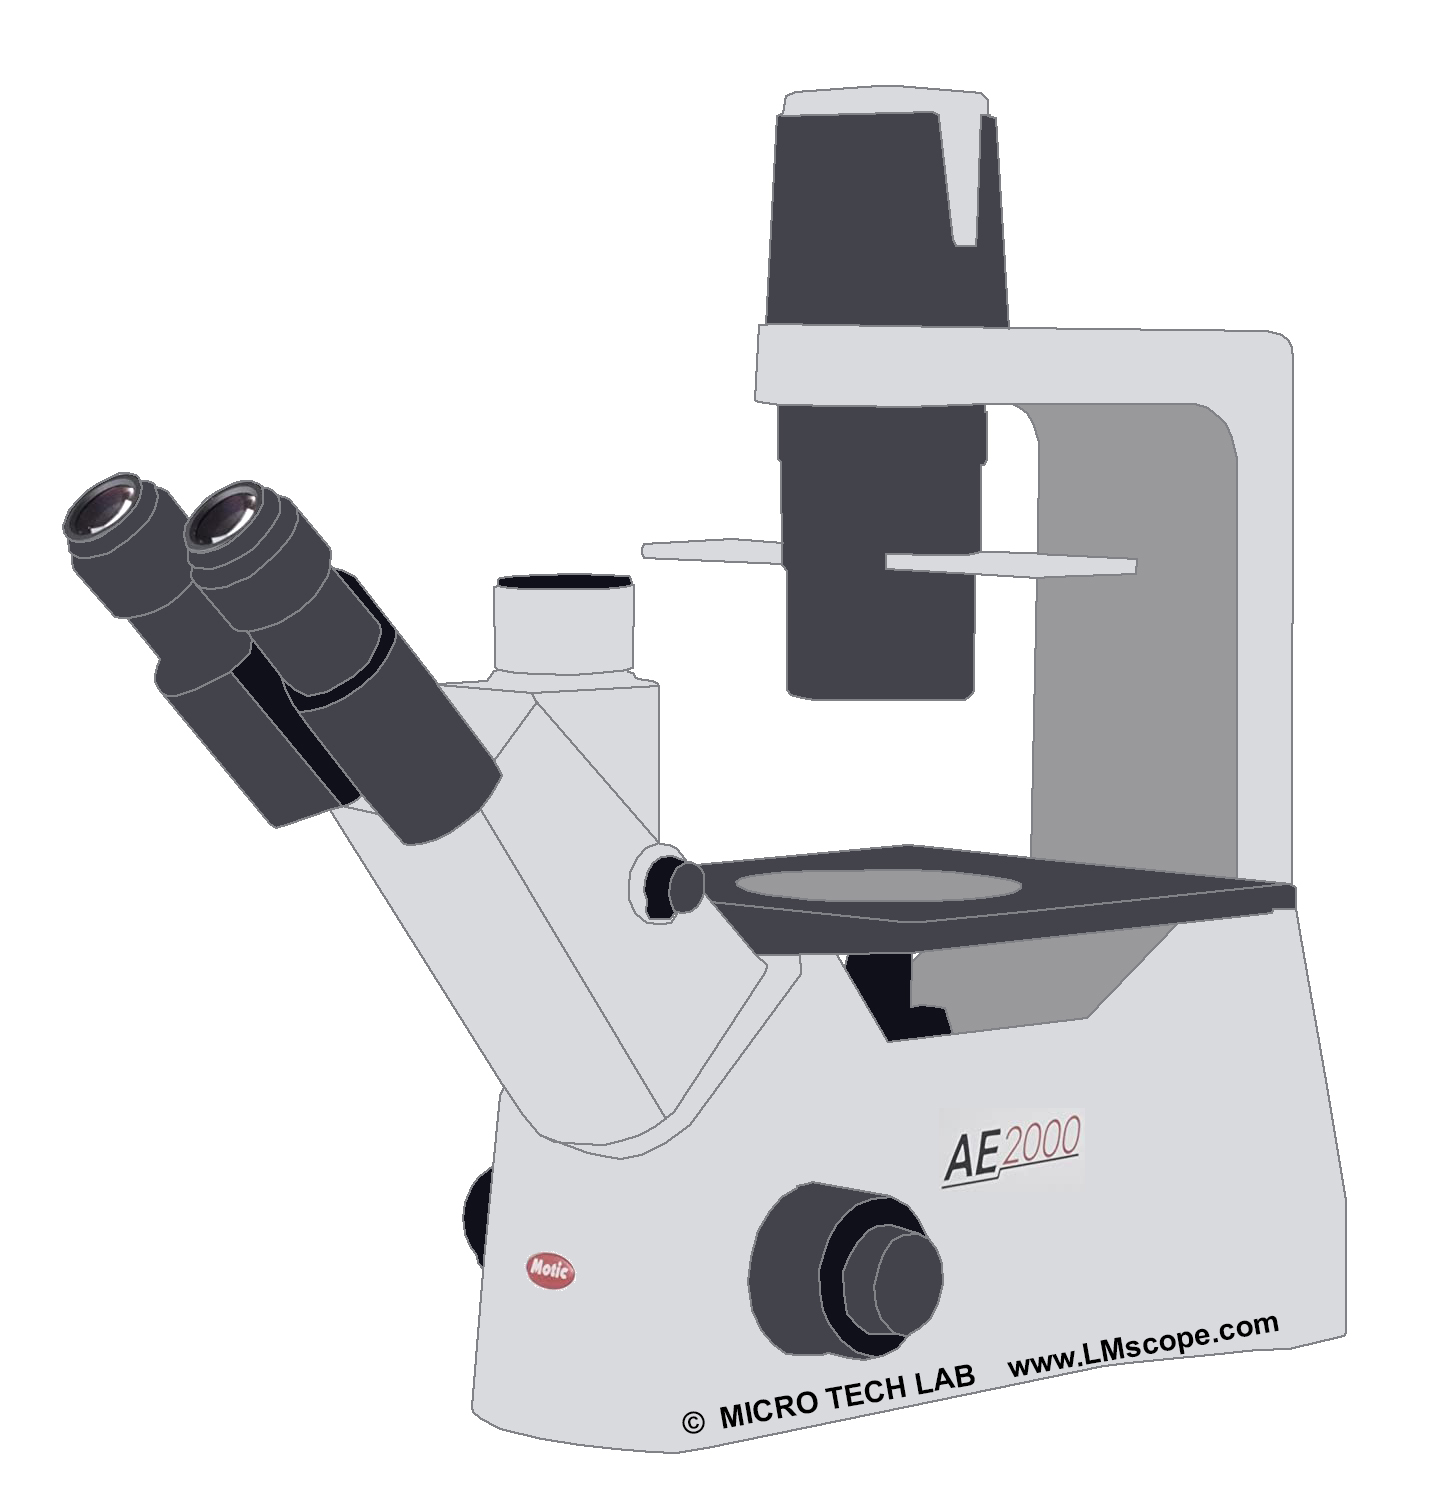 Motic AE2000 inverse microscope 38mm photo tube adapter solution